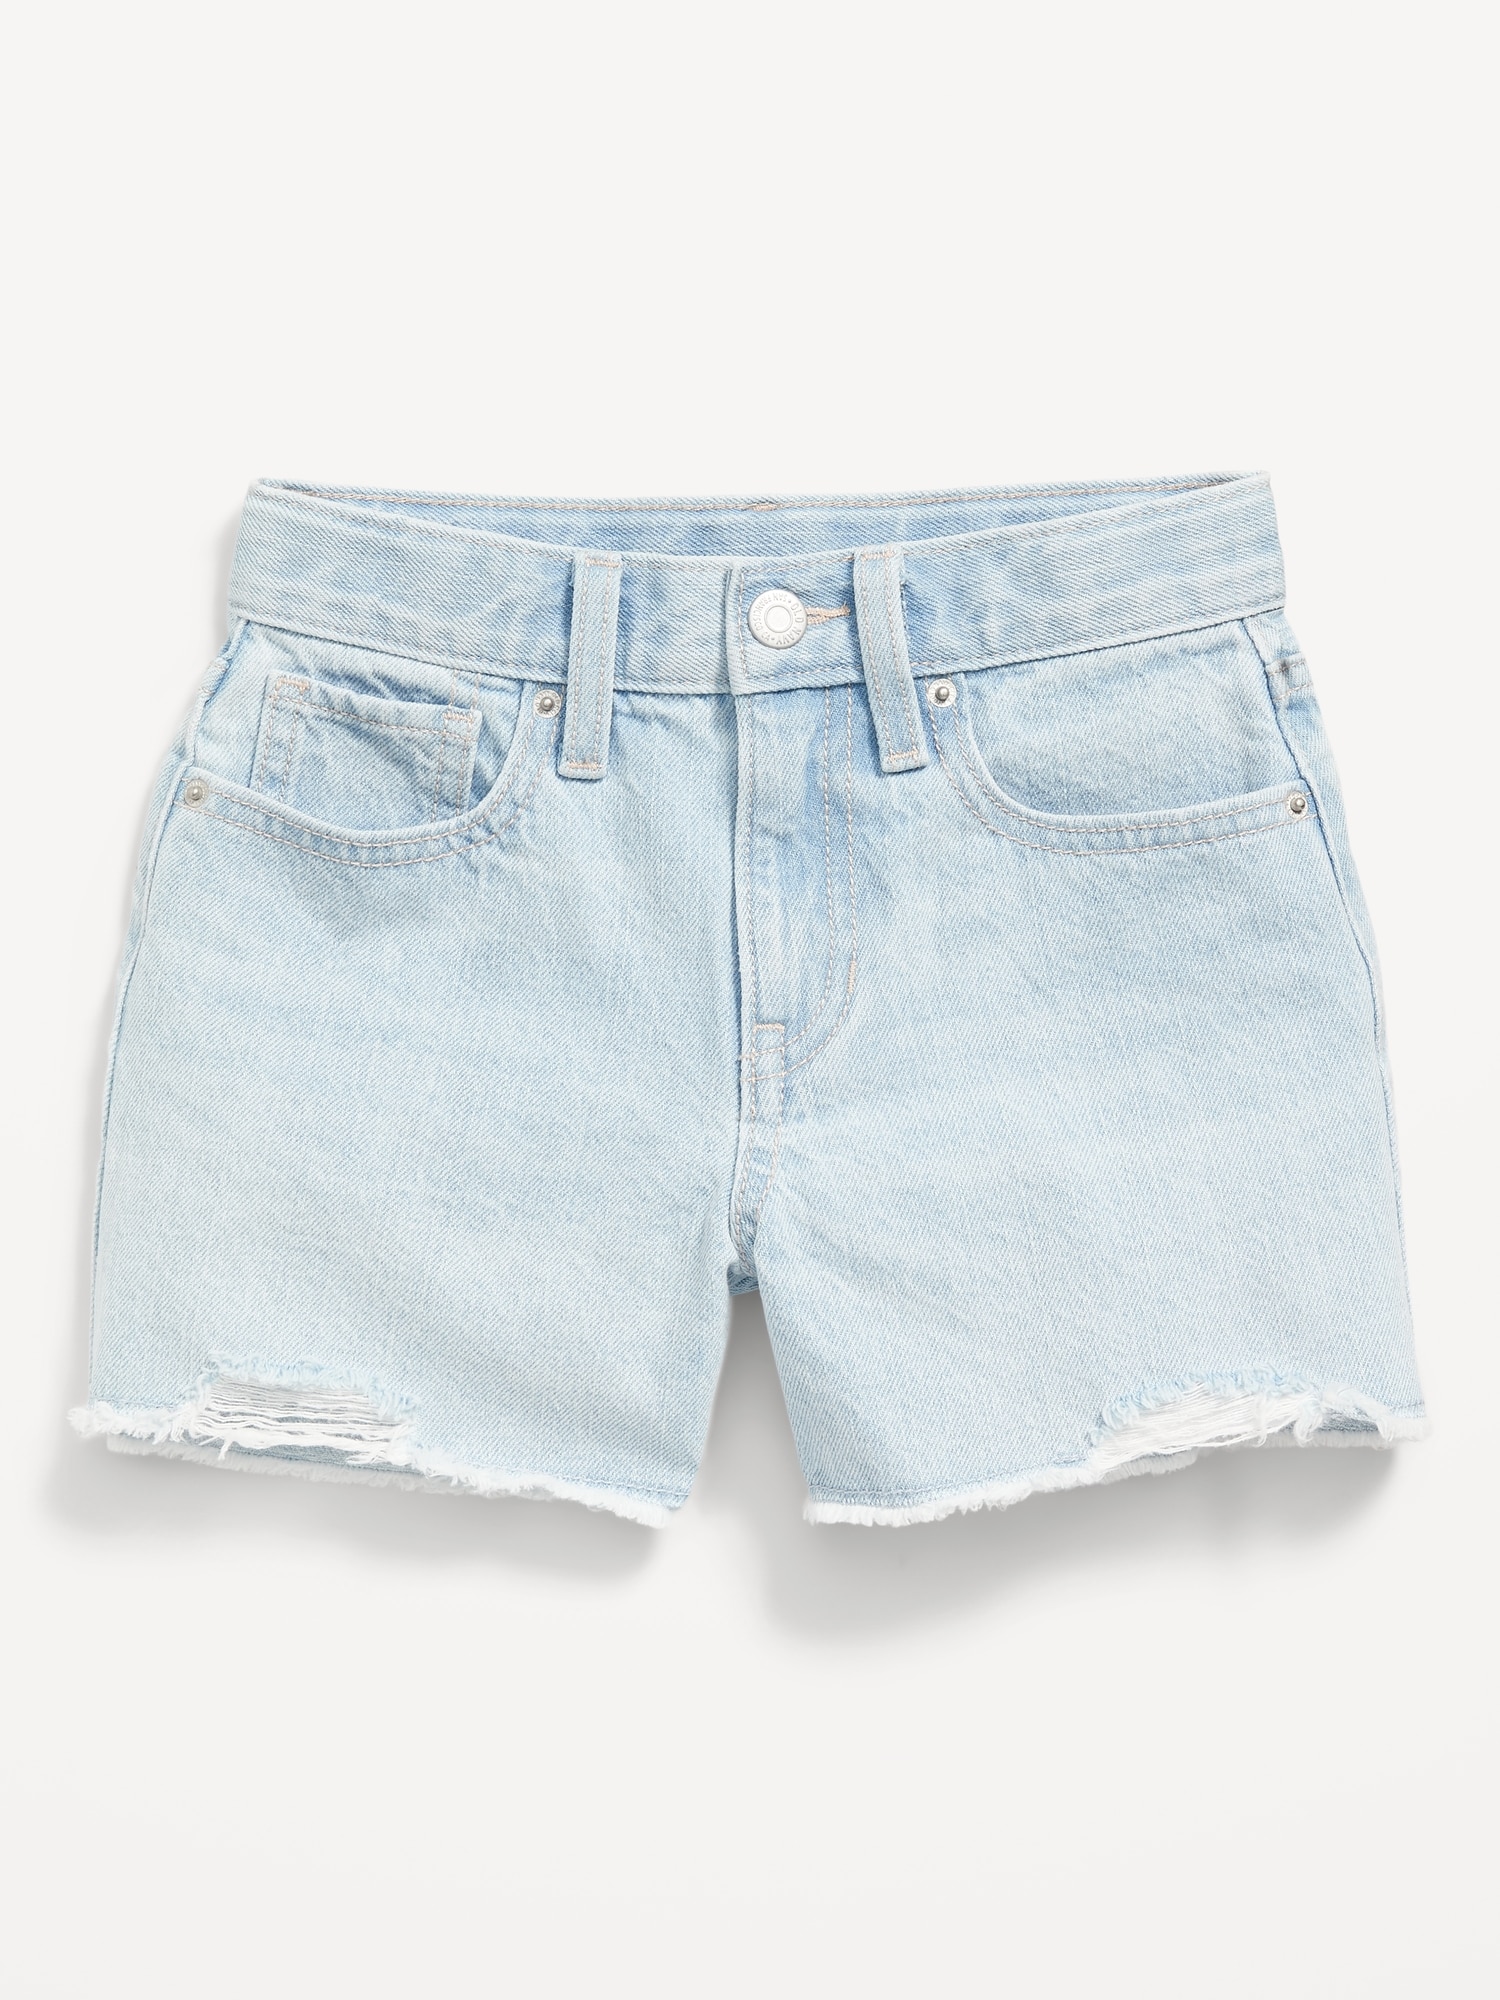 Old Navy High-Waisted Light-Wash Cut-Off Jean Shorts for Girls pink. 1